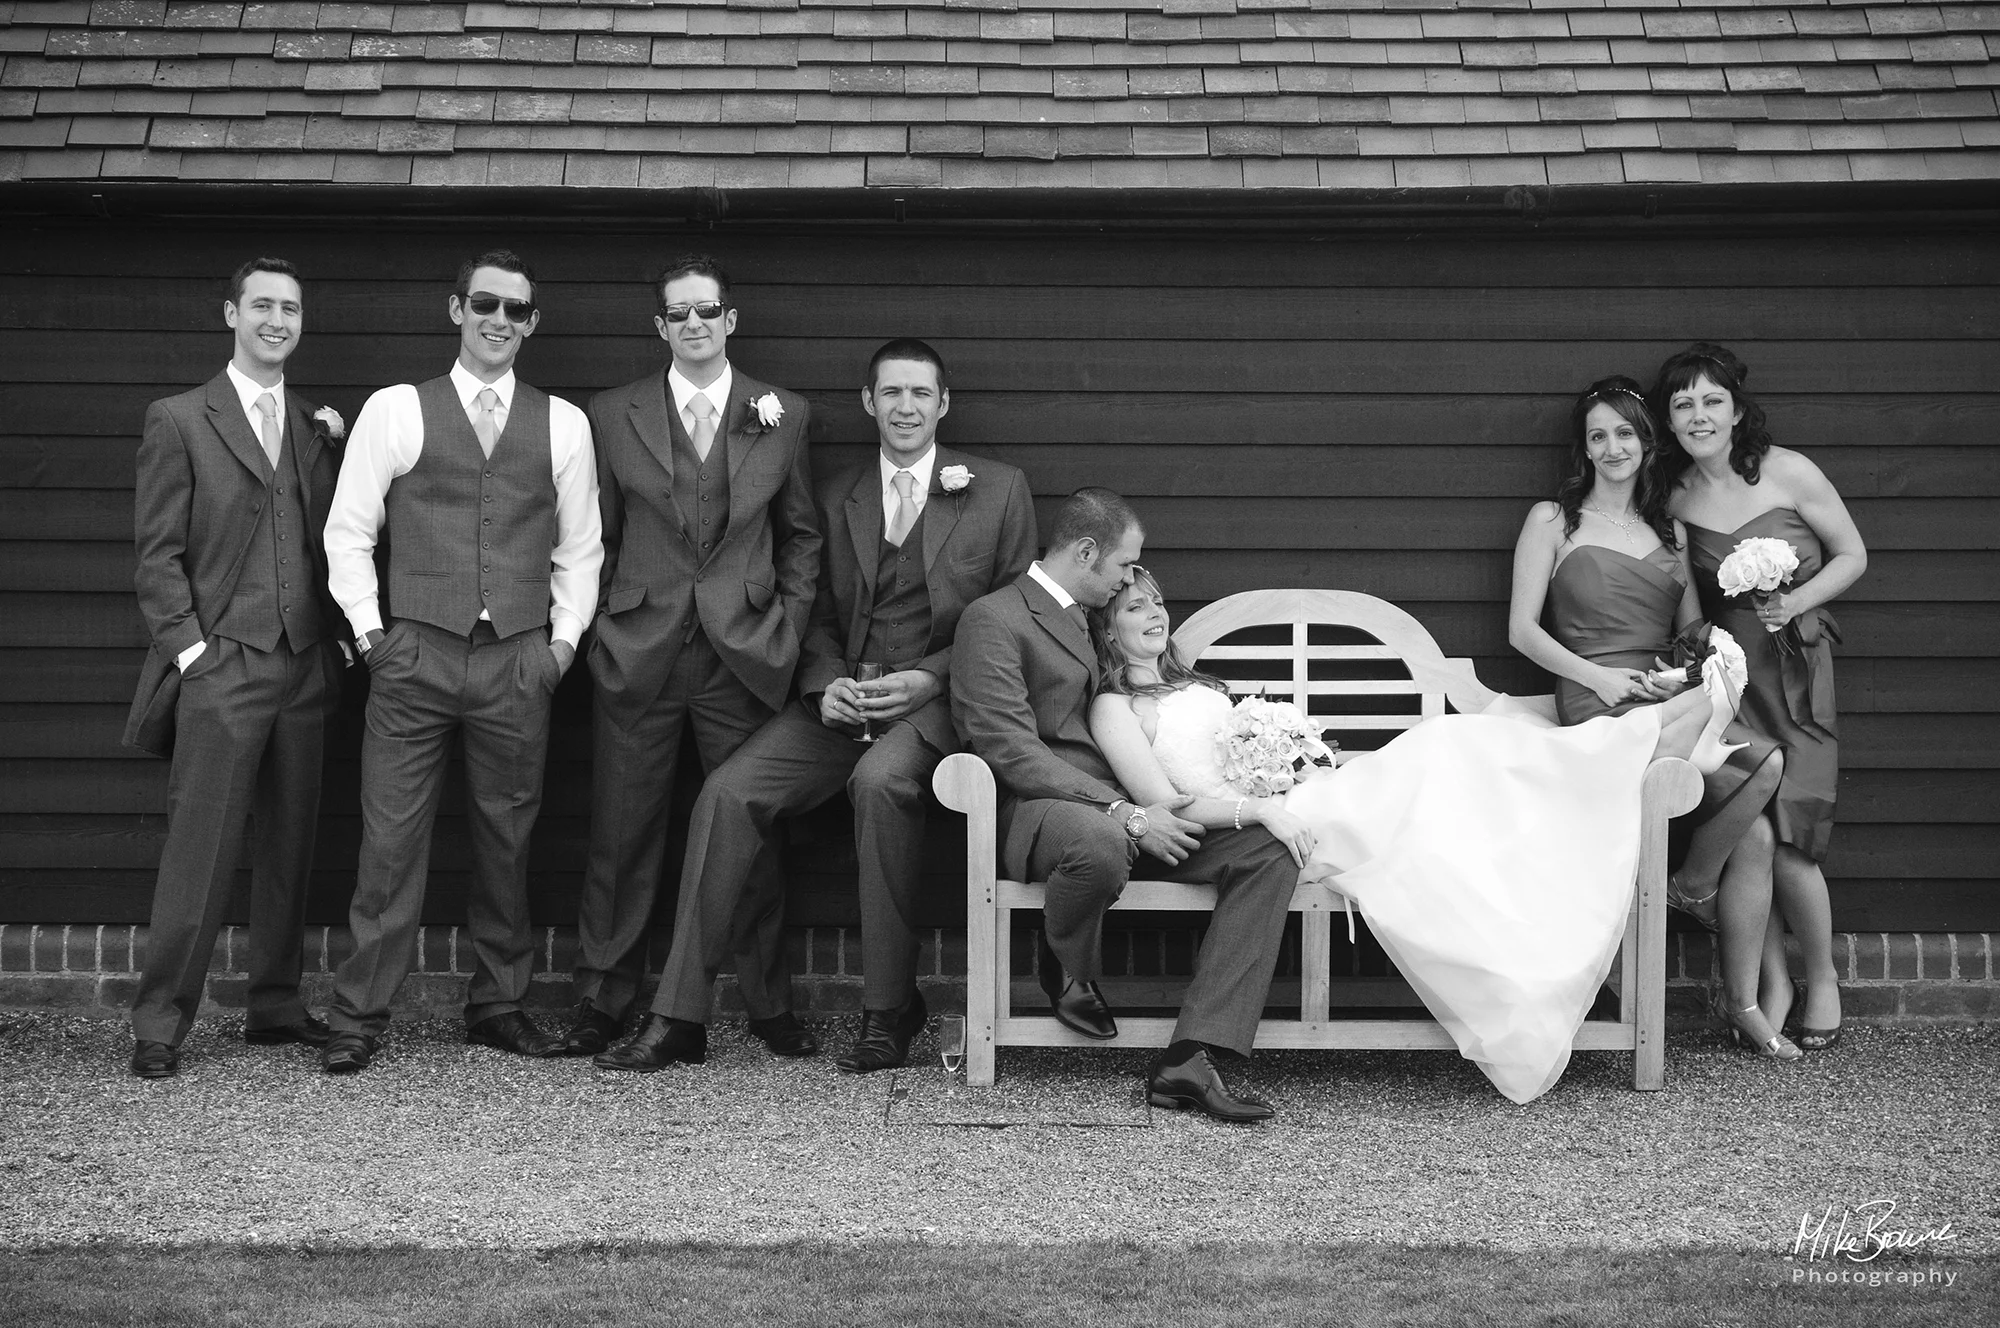 Bride and groom on a wooden bench with their bridesmaids and ushers